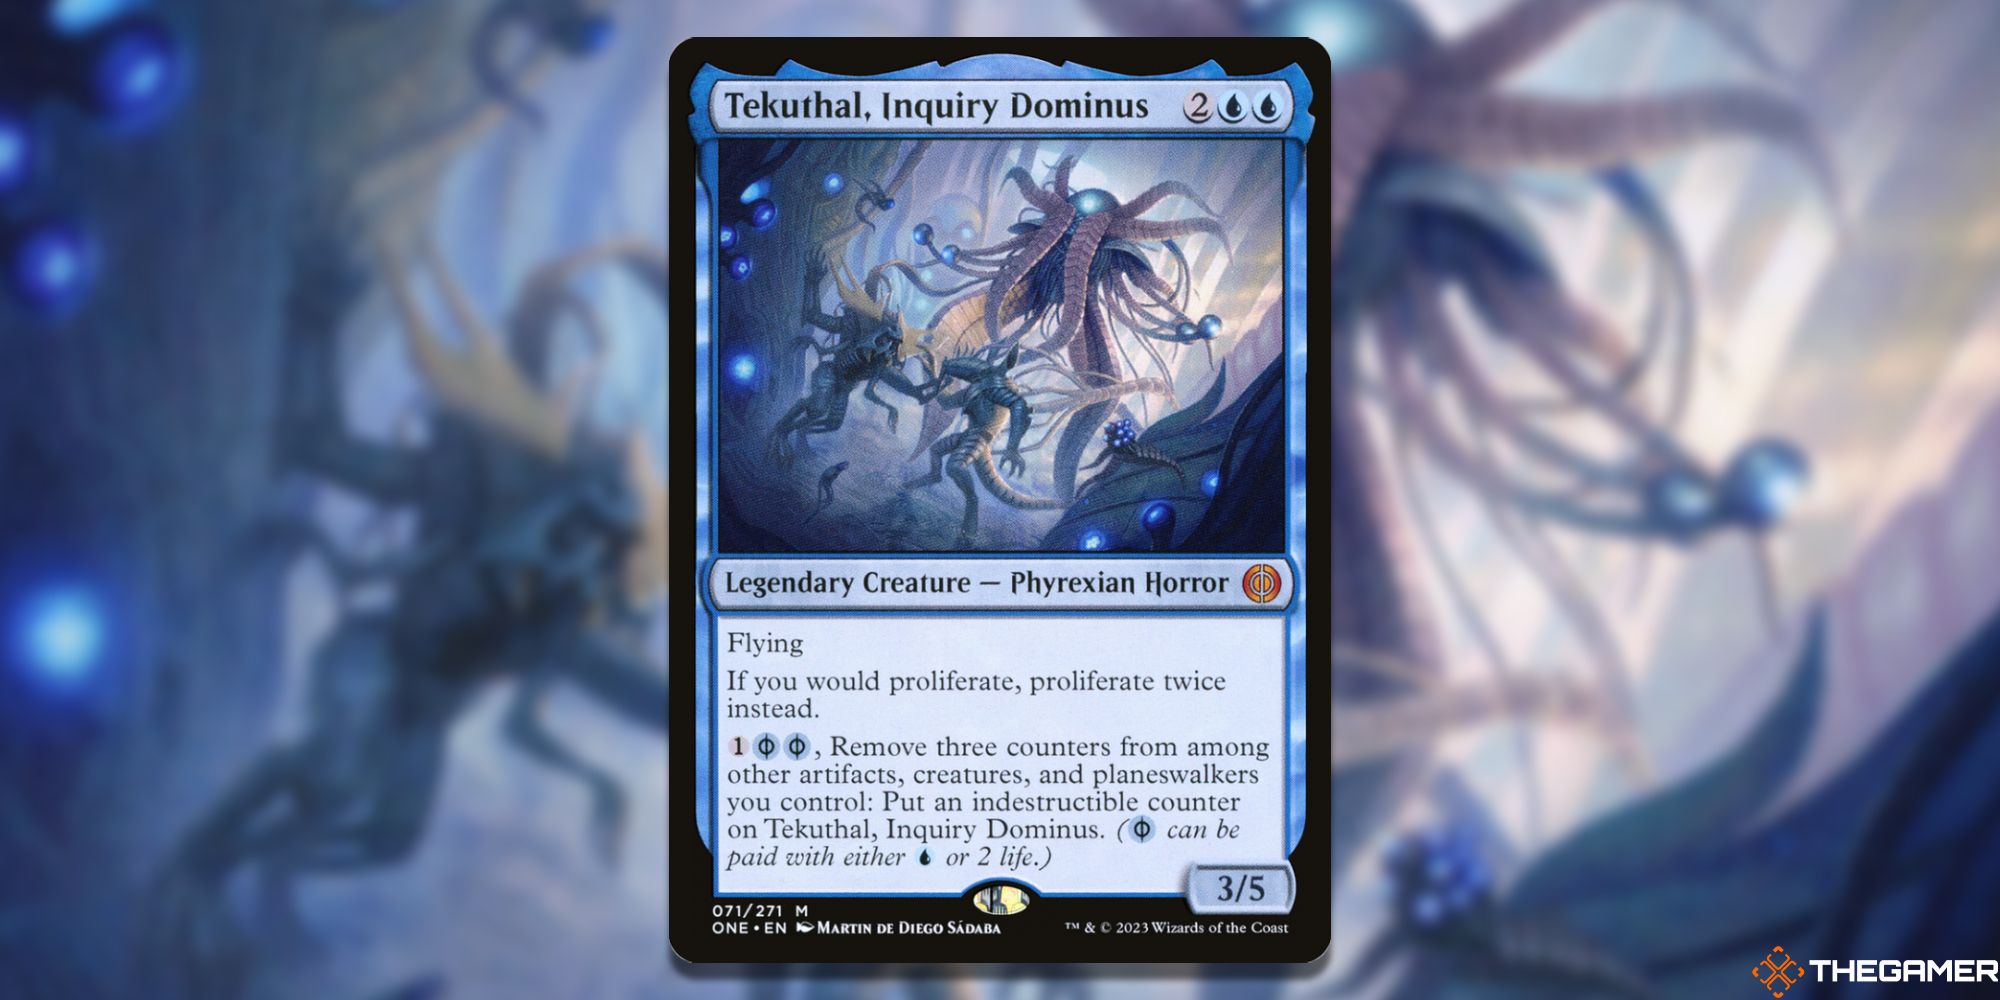 Image of the Tekuthal, Inquiry Dominus card in Magic: The Gathering, with art by Martin de Diego Sádaba 